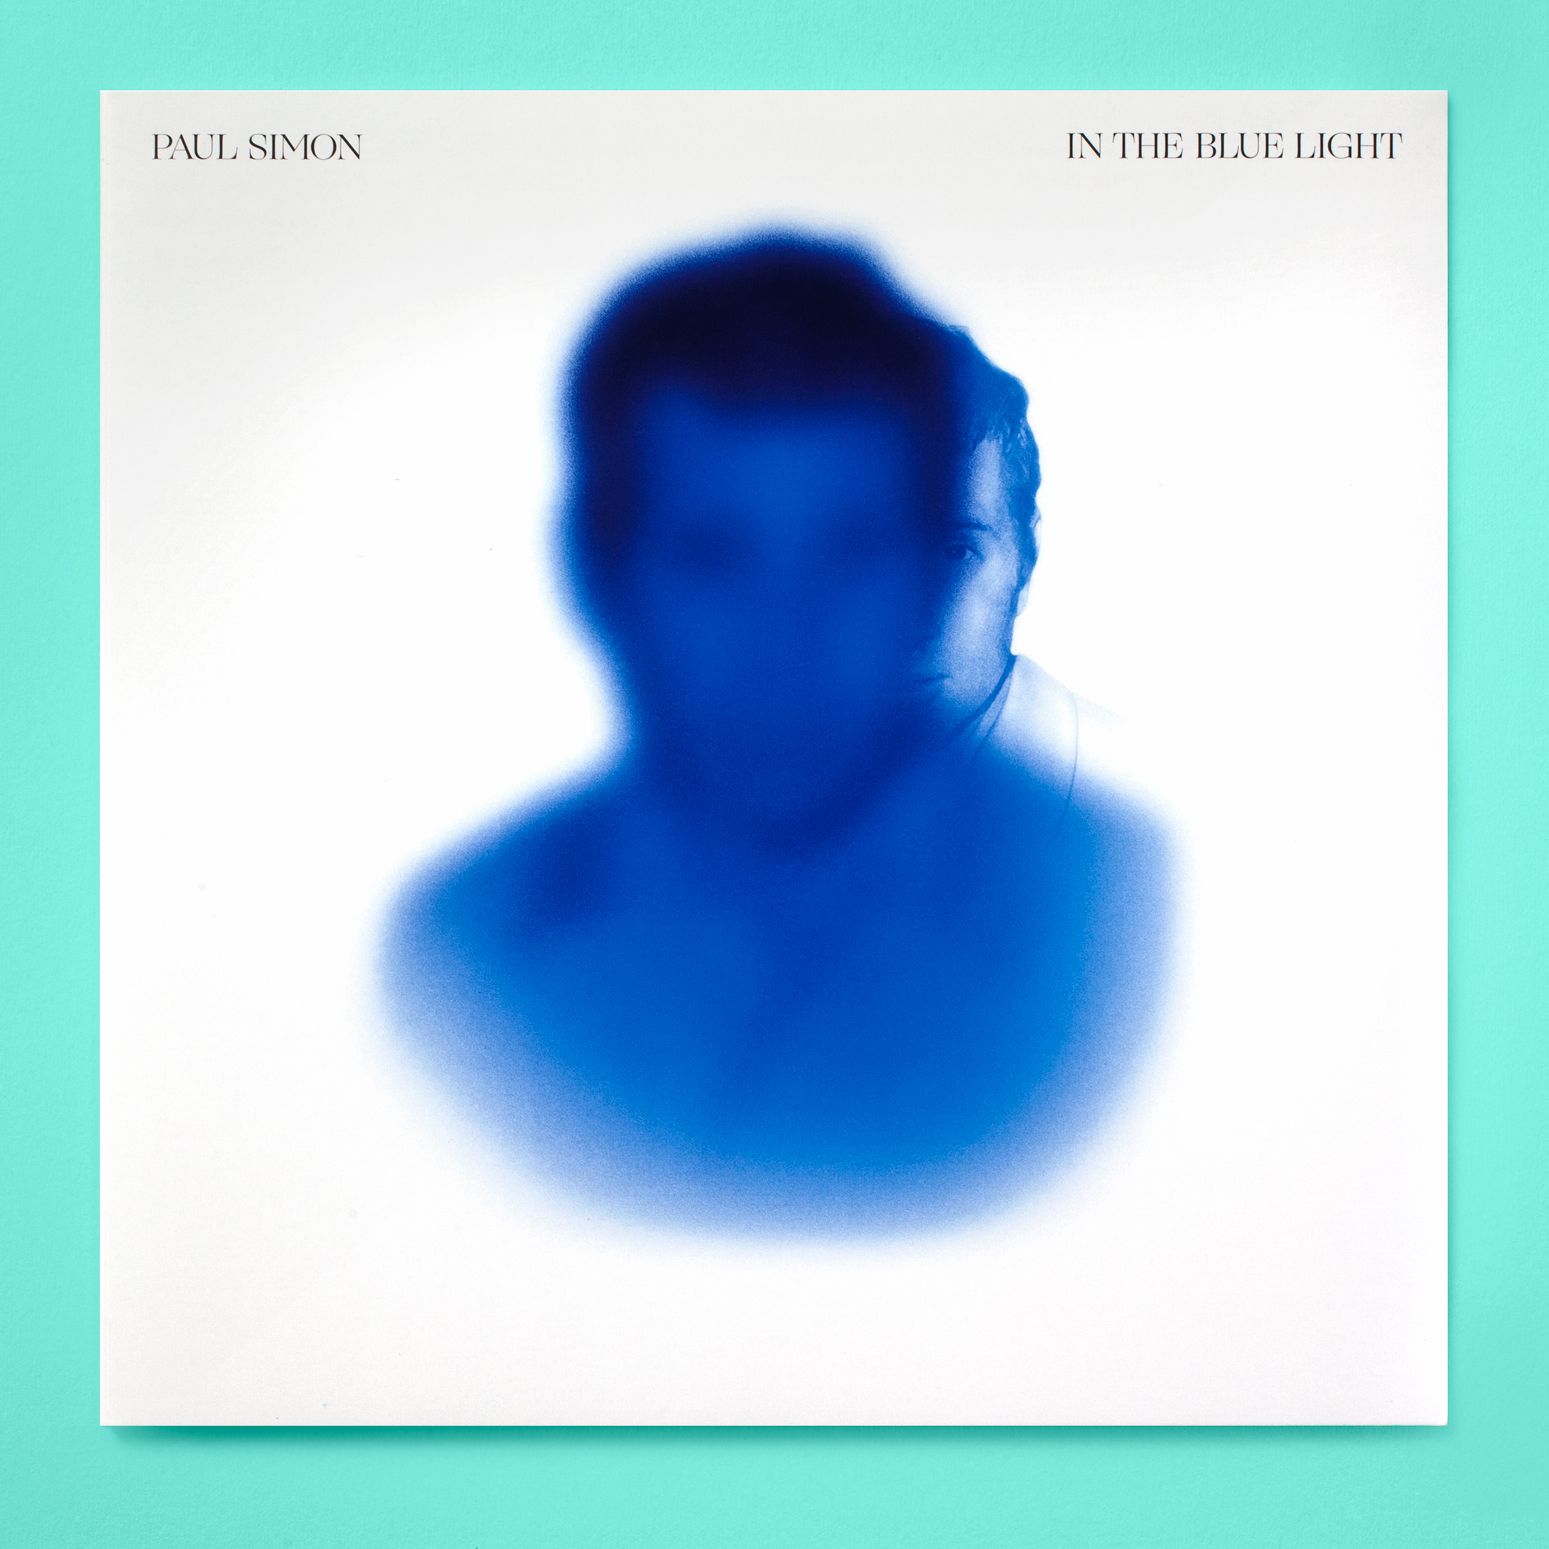 In the Blue Light by Paul Simon